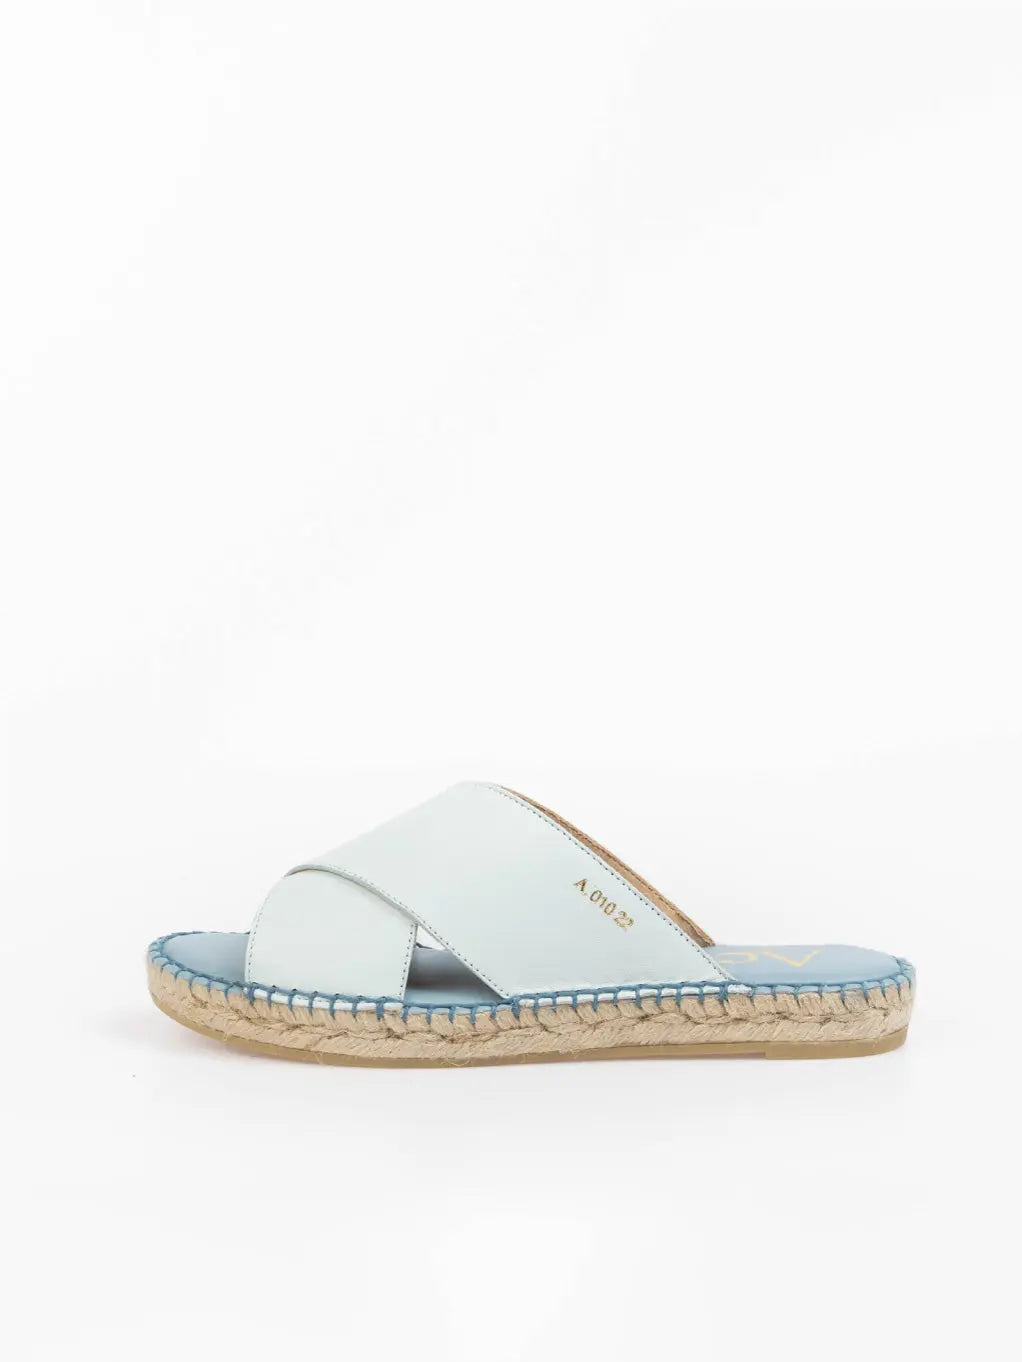 A pair of Uccle Light Blue Espadrilles with crisscross straps and exposed toes. The insole features gold text on the left sandal, and the stitching around the edges is in a matching light blue color. The espadrilles from Act Series are placed on a white background.